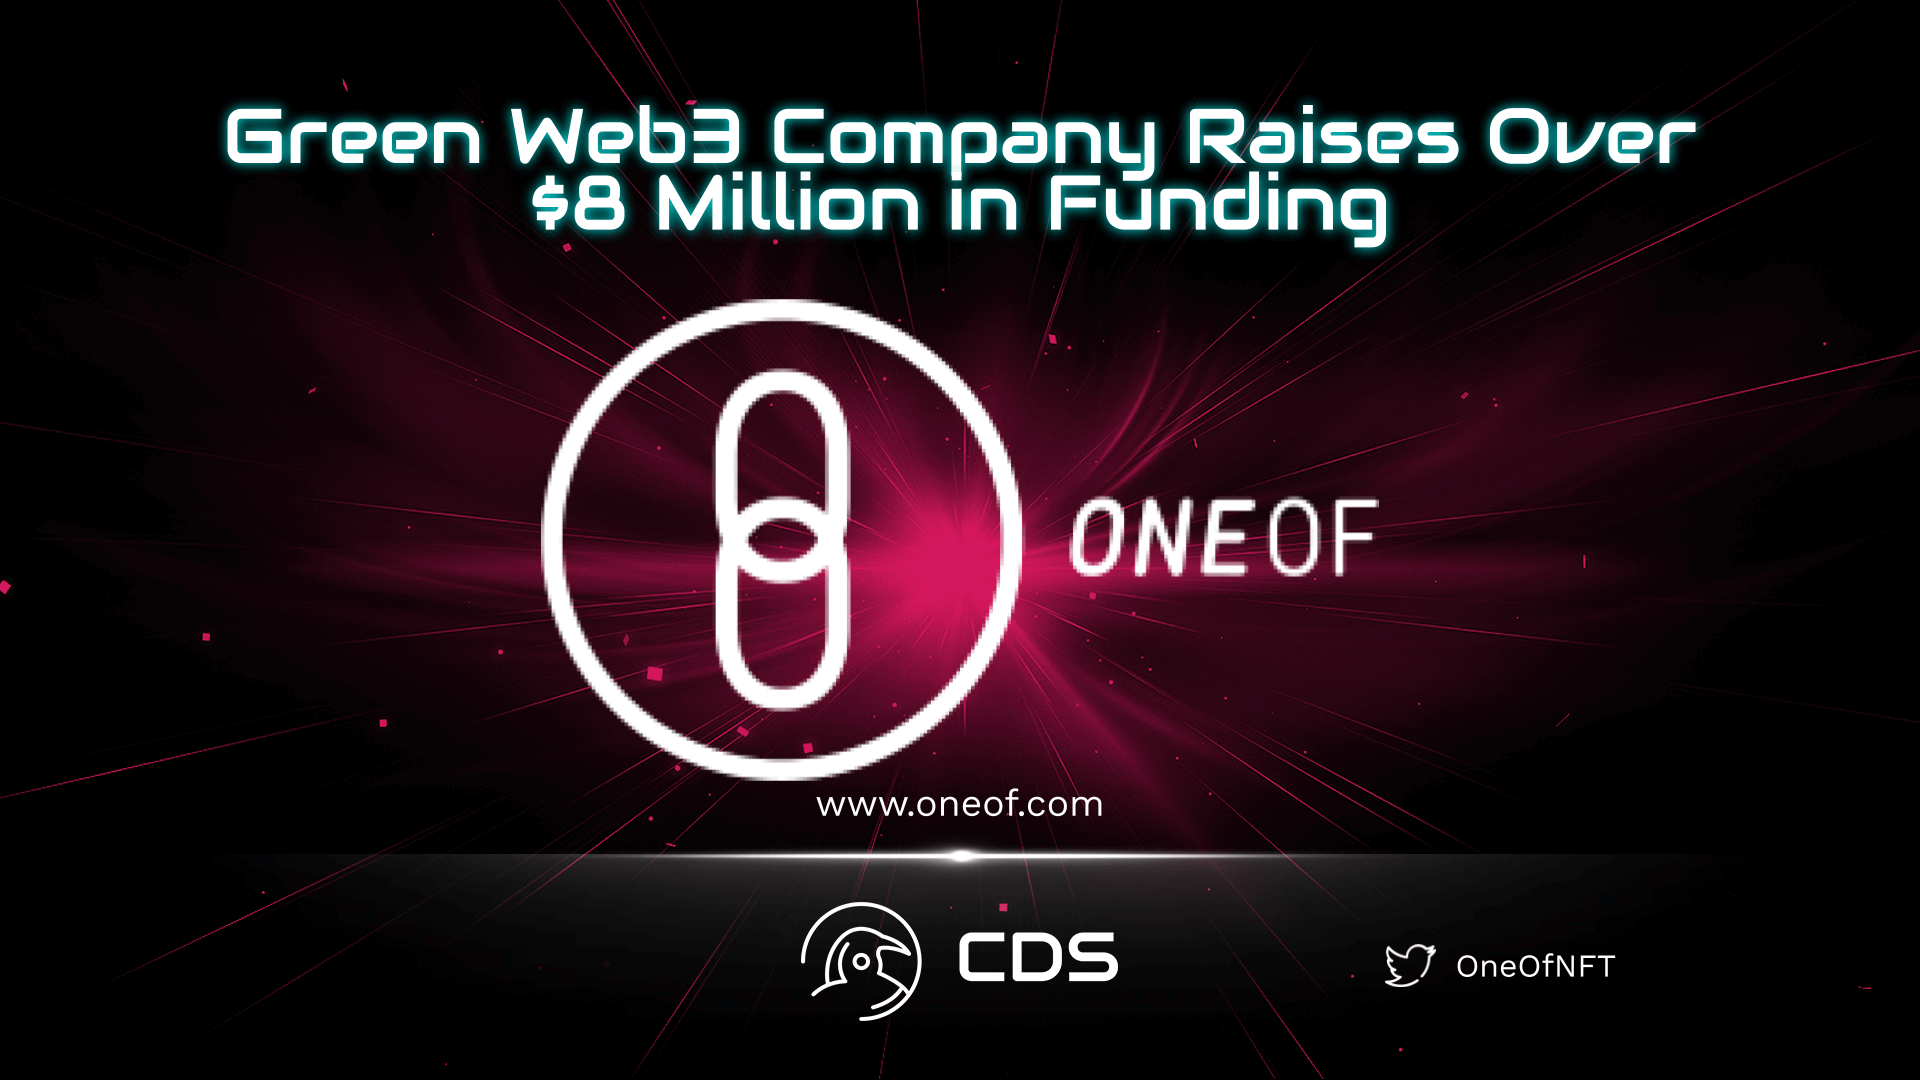 Oneof Raises over $8M in funding